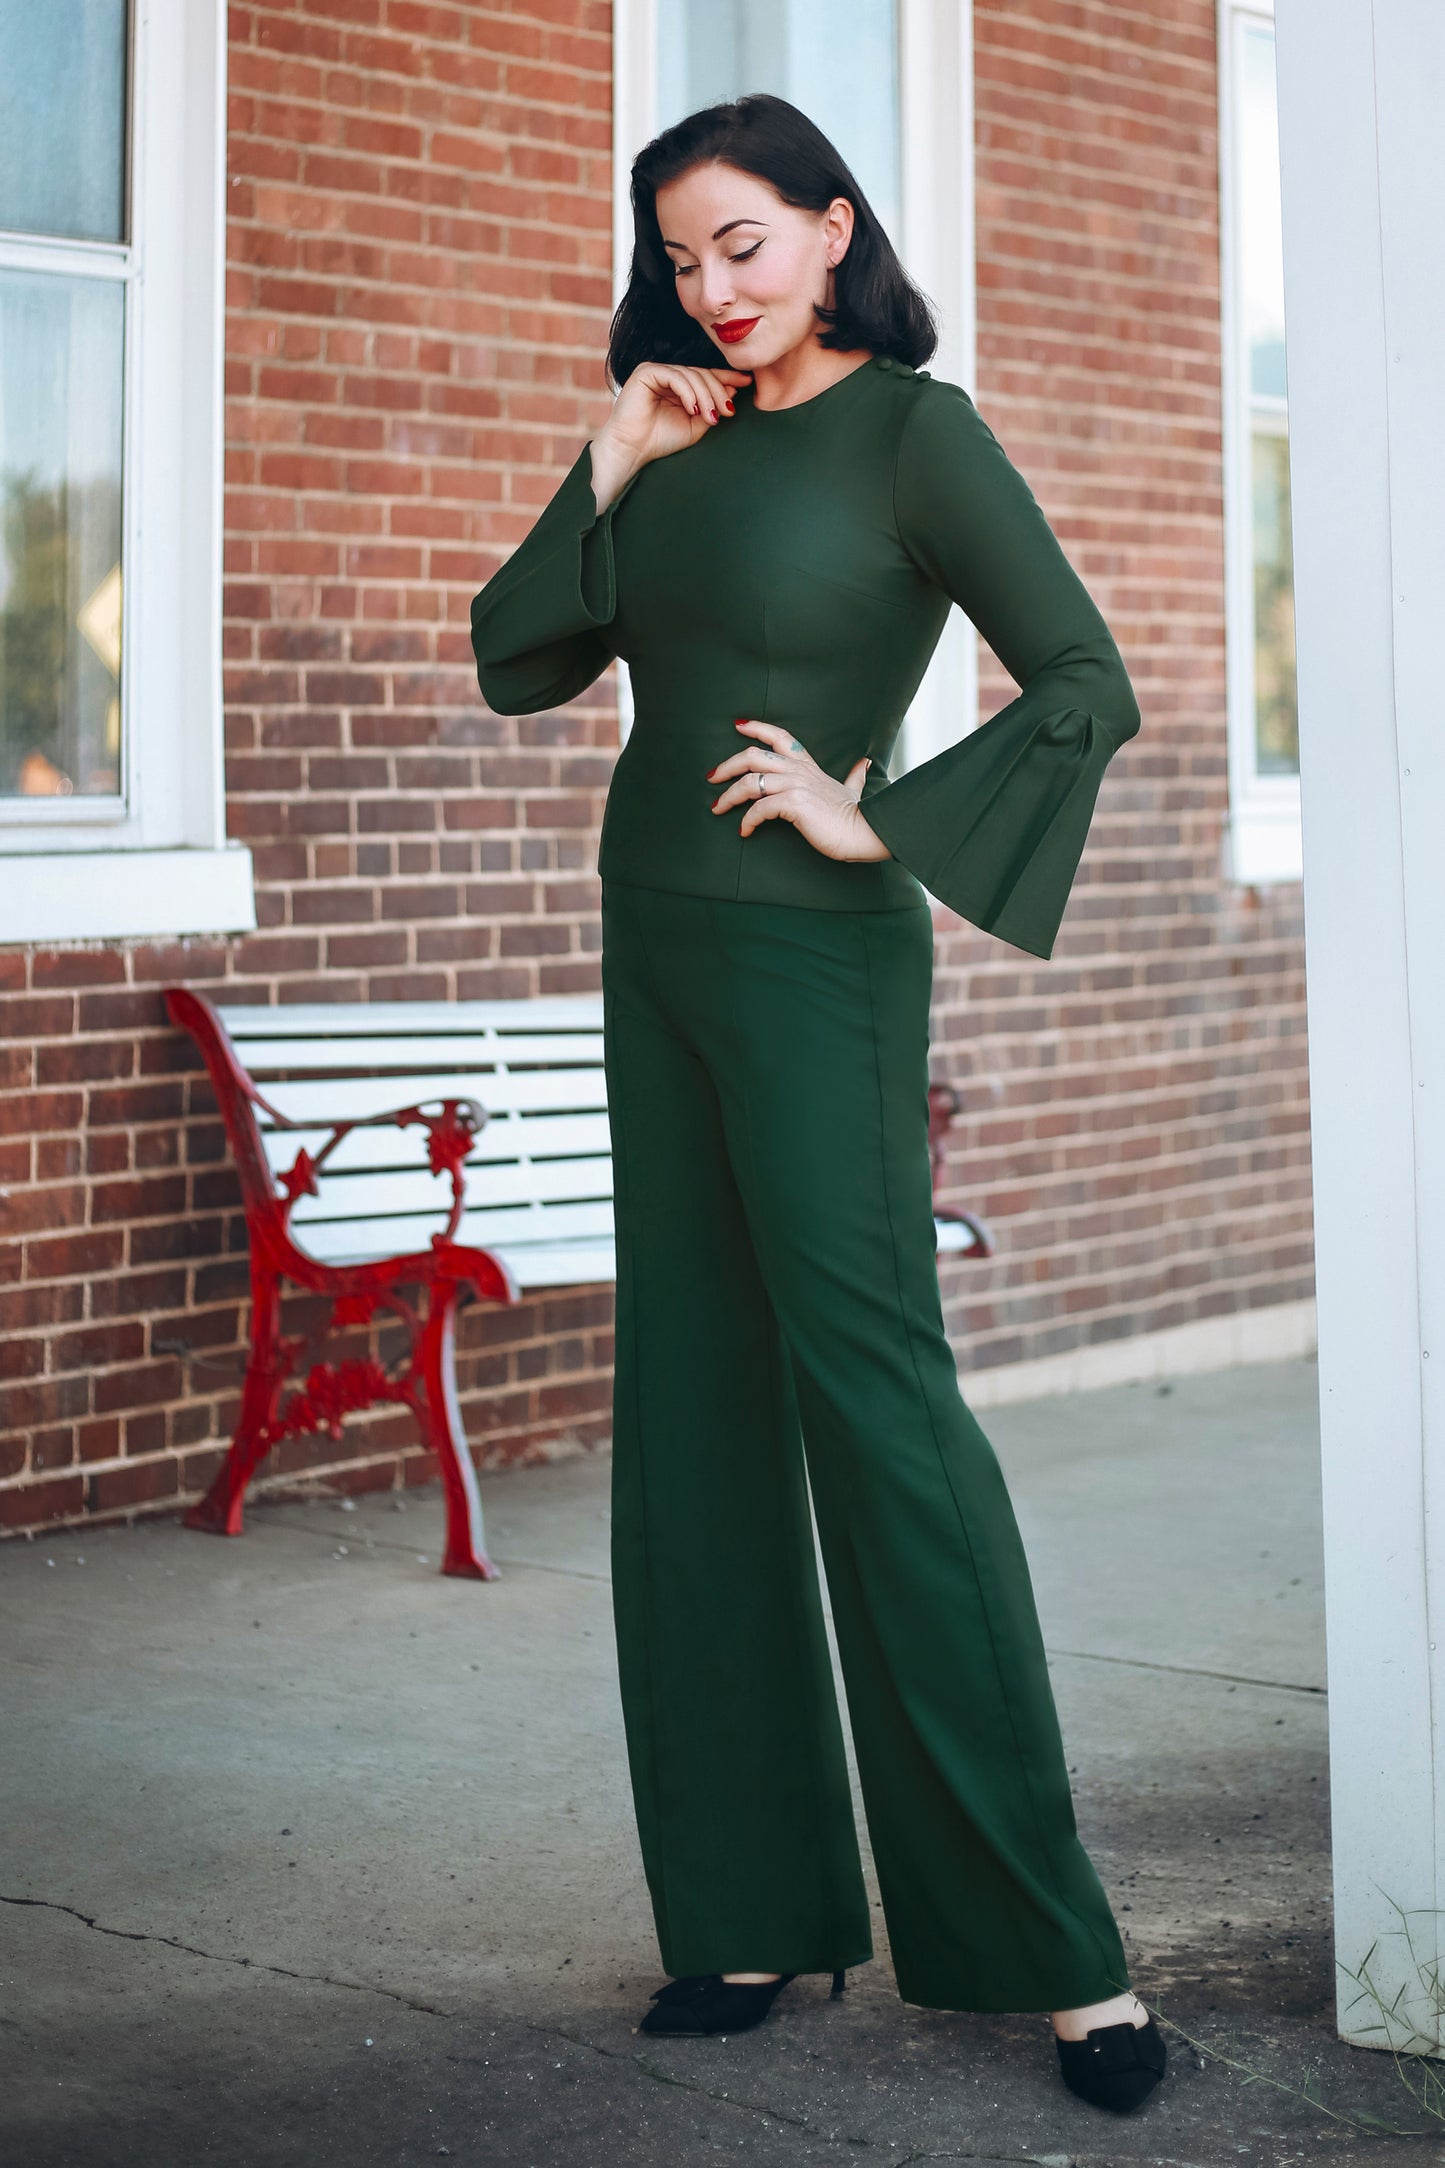 The Tawny Top in Hunter Green